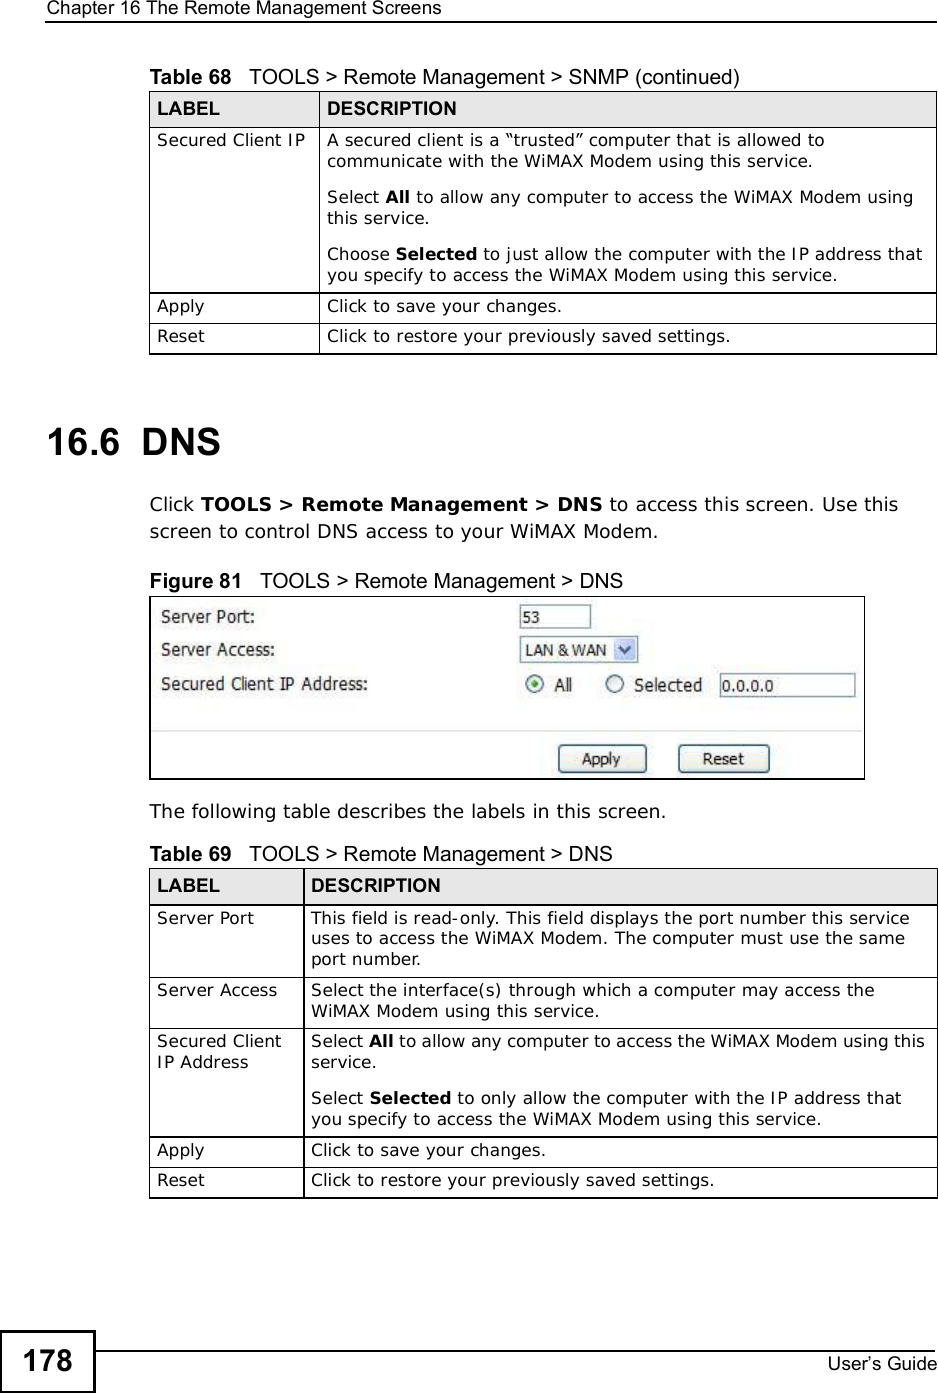 Chapter 16The Remote Management ScreensUser s Guide17816.6  DNSClick TOOLS &gt; Remote Management &gt; DNS to access this screen. Use this screen to control DNS access to your WiMAX Modem.Figure 81   TOOLS &gt; Remote Management &gt; DNSThe following table describes the labels in this screen.Secured Client IP A secured client is a “trusted” computer that is allowed to communicate with the WiMAX Modem using this service. Select All to allow any computer to access the WiMAX Modem using this service.Choose Selected to just allow the computer with the IP address that you specify to access the WiMAX Modem using this service.Apply Click to save your changes.Reset Click to restore your previously saved settings.Table 68   TOOLS &gt; Remote Management &gt; SNMP (continued)LABEL DESCRIPTIONTable 69   TOOLS &gt; Remote Management &gt; DNSLABEL DESCRIPTIONServer Port This field is read-only. This field displays the port number this service uses to access the WiMAX Modem. The computer must use the same port number.Server Access Select the interface(s) through which a computer may access the WiMAX Modem using this service.Secured Client IP Address Select All to allow any computer to access the WiMAX Modem using this service.Select Selected to only allow the computer with the IP address that you specify to access the WiMAX Modem using this service.Apply Click to save your changes.Reset Click to restore your previously saved settings.